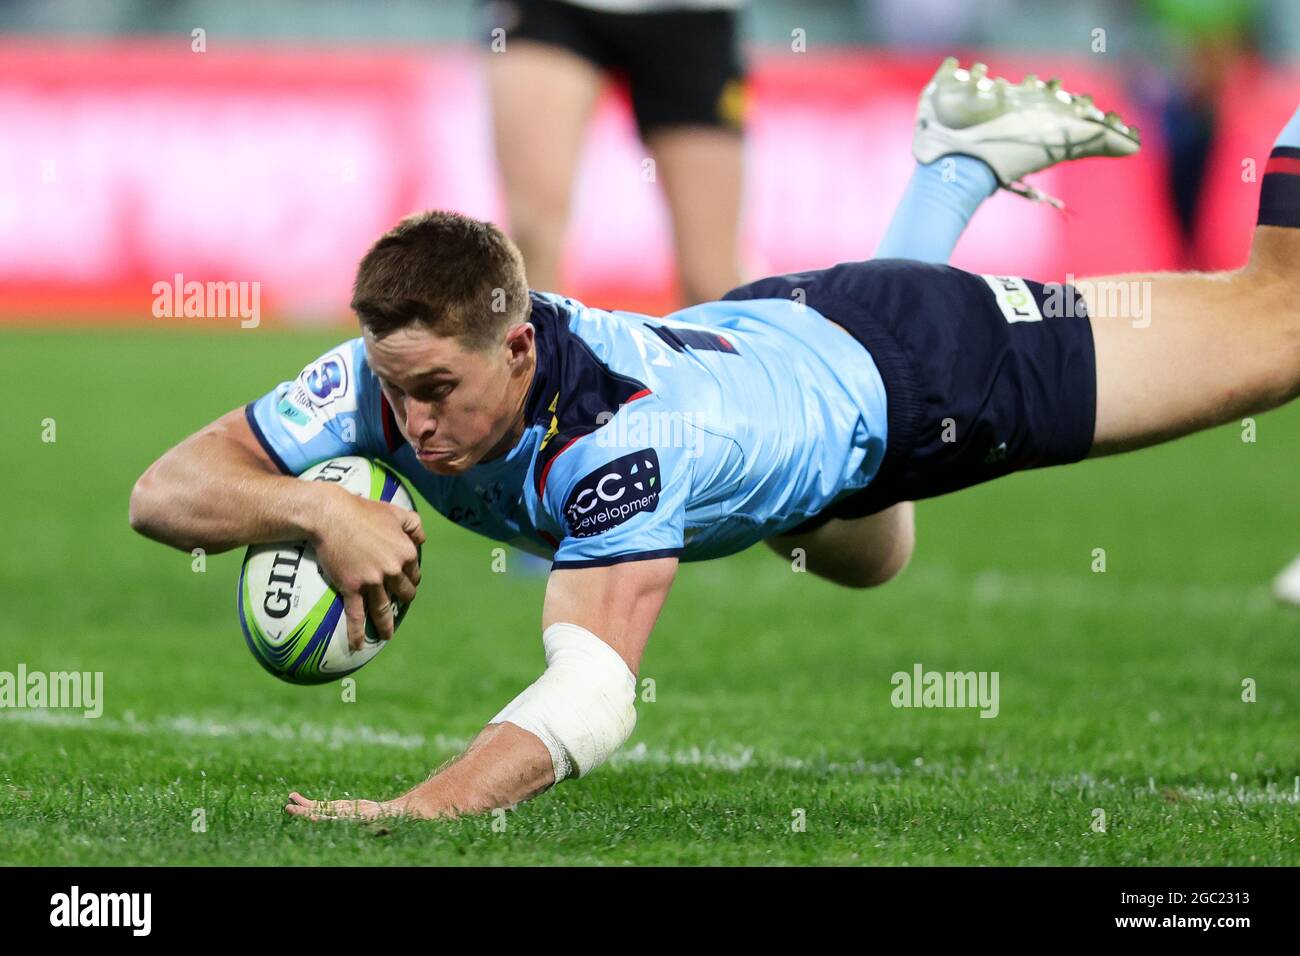 SYDNEY, AUSTRALIA - MAY 14: Alex Newsome of the Waratahs scores a try during round one of the Super Rugby Trans Tasman match between the NSW Waratahs and Hurricanes at Sydney Cricket Ground on May 14, 2021 in Sydney, Australia. (Photo by Pete Dovgan/Speed Media/Icon Sportswire). Credit: Pete Dovgan/Speed Media/Alamy Live News Stock Photo